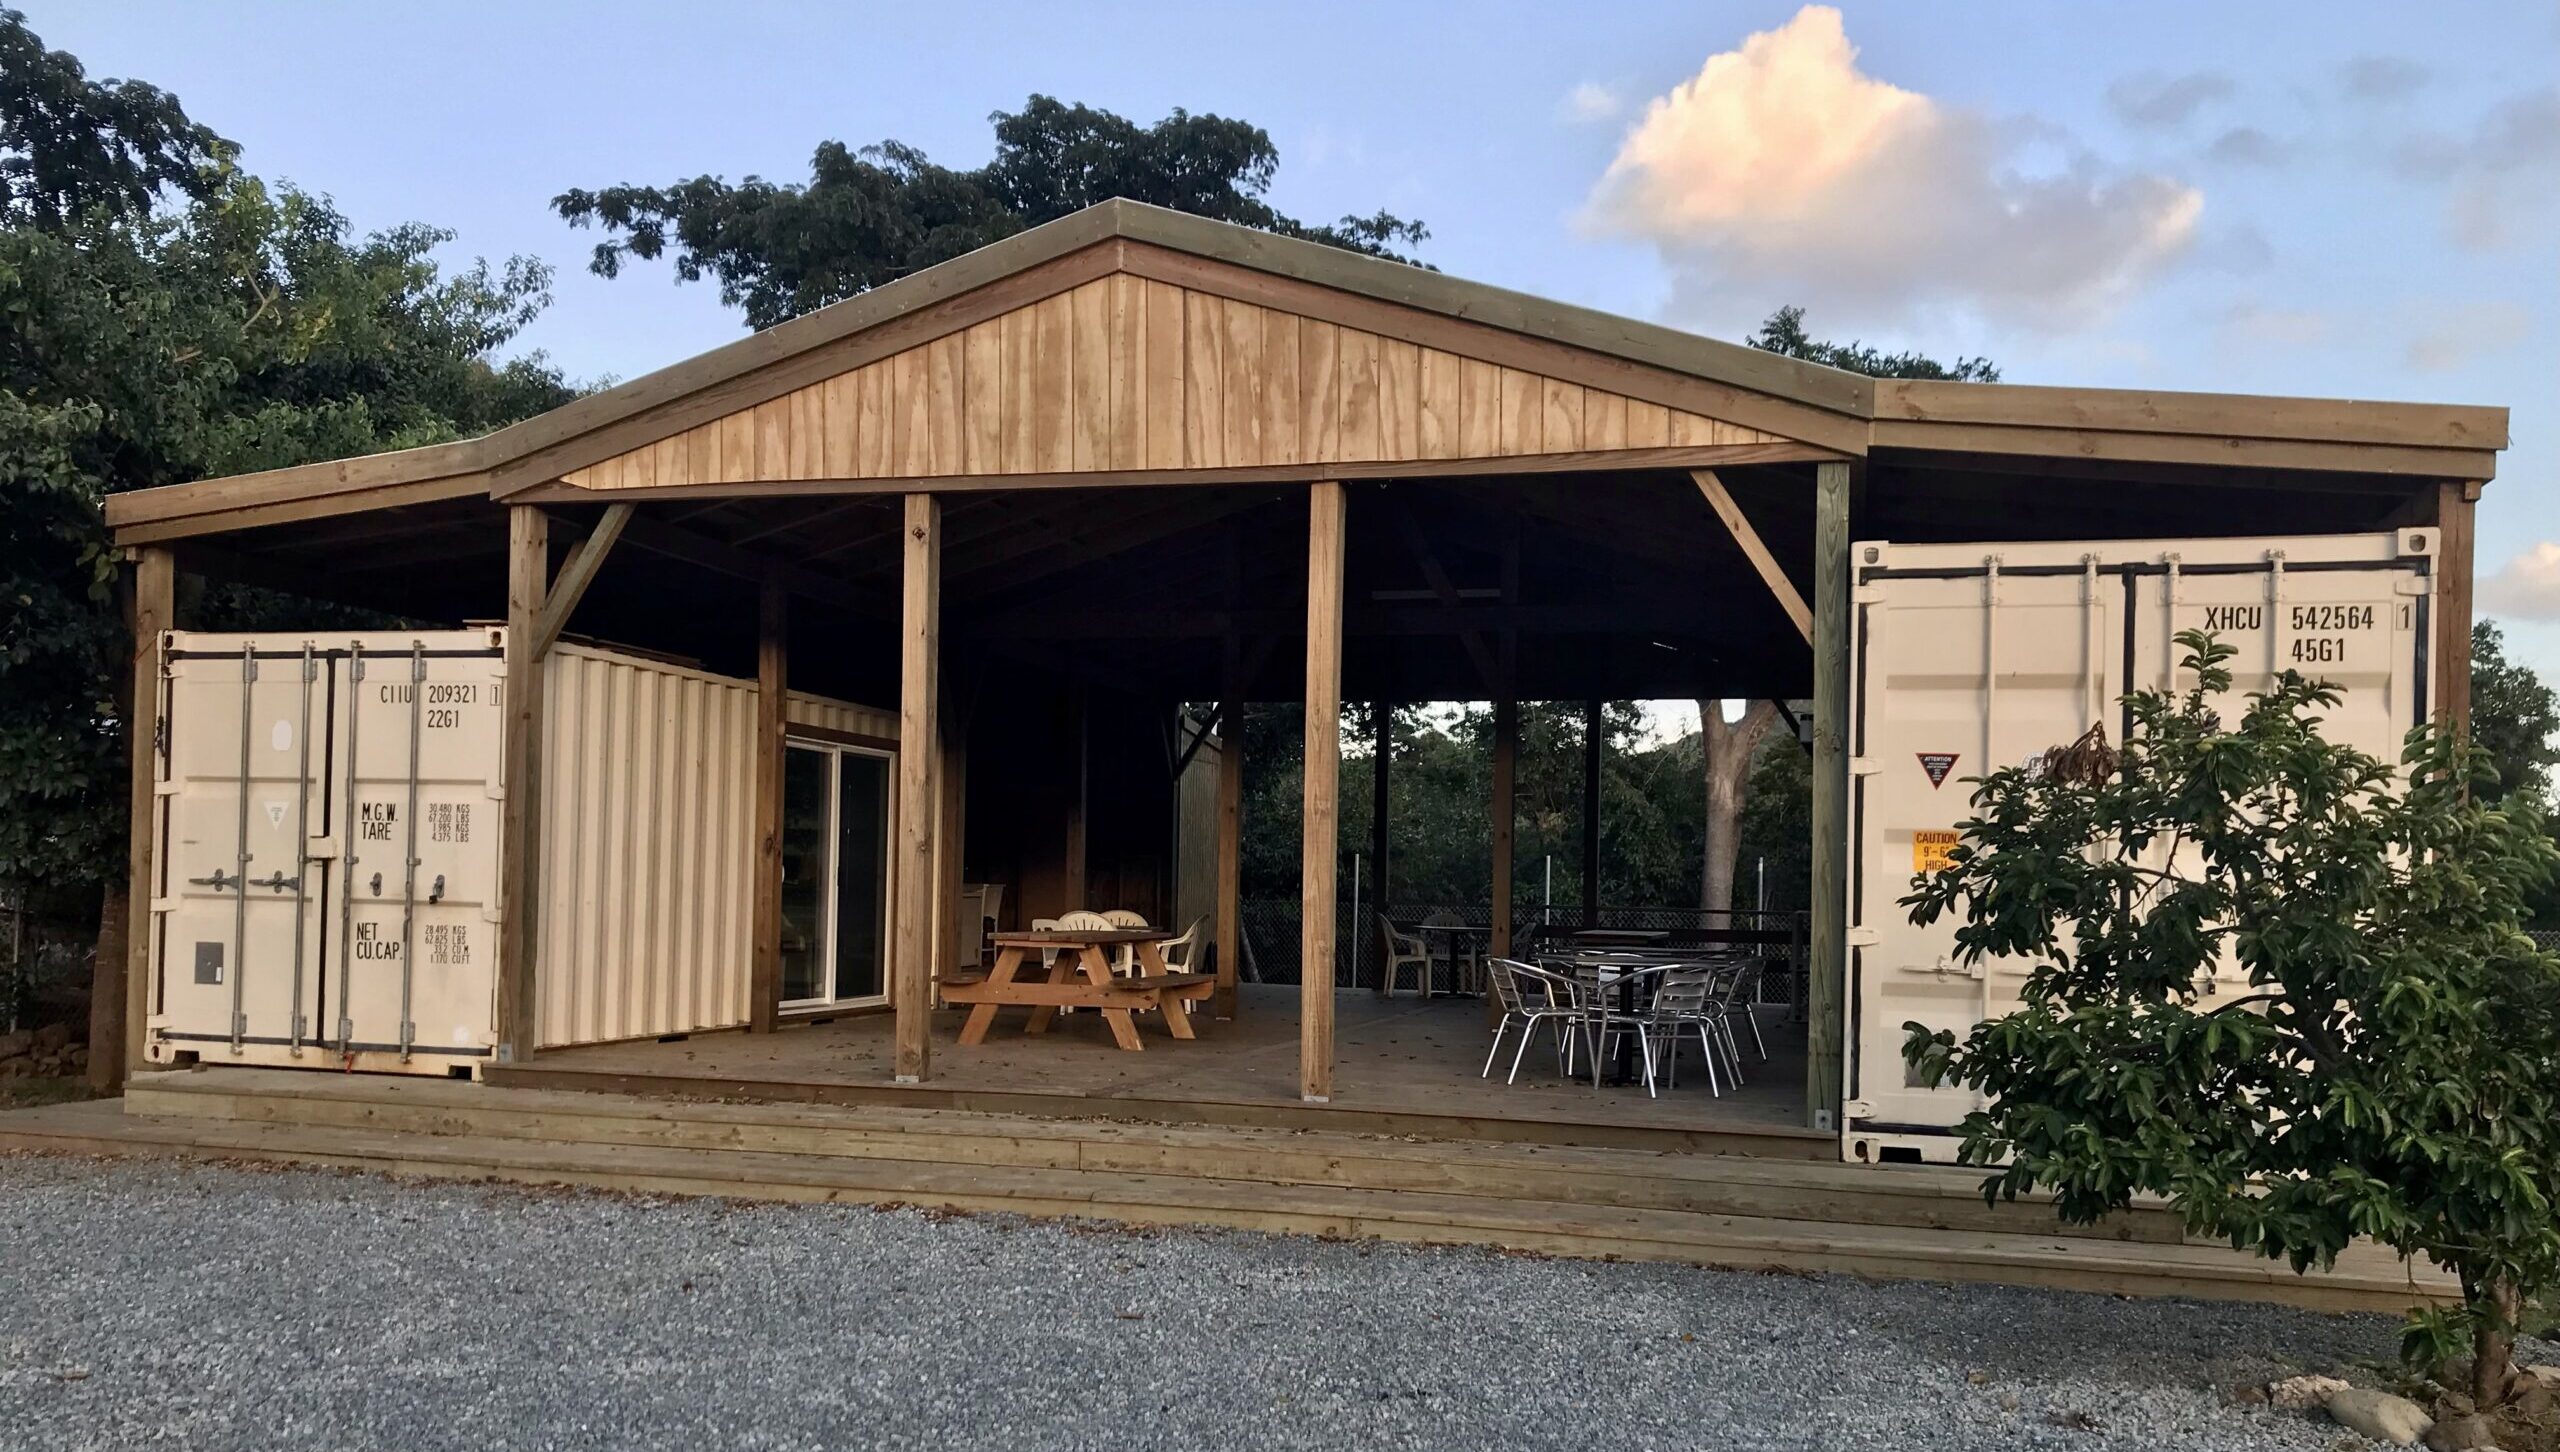 Our Place consists of a wooden pavilion and containers that can be used formultiple purposes. (Photo courtesy Beverly Melius)